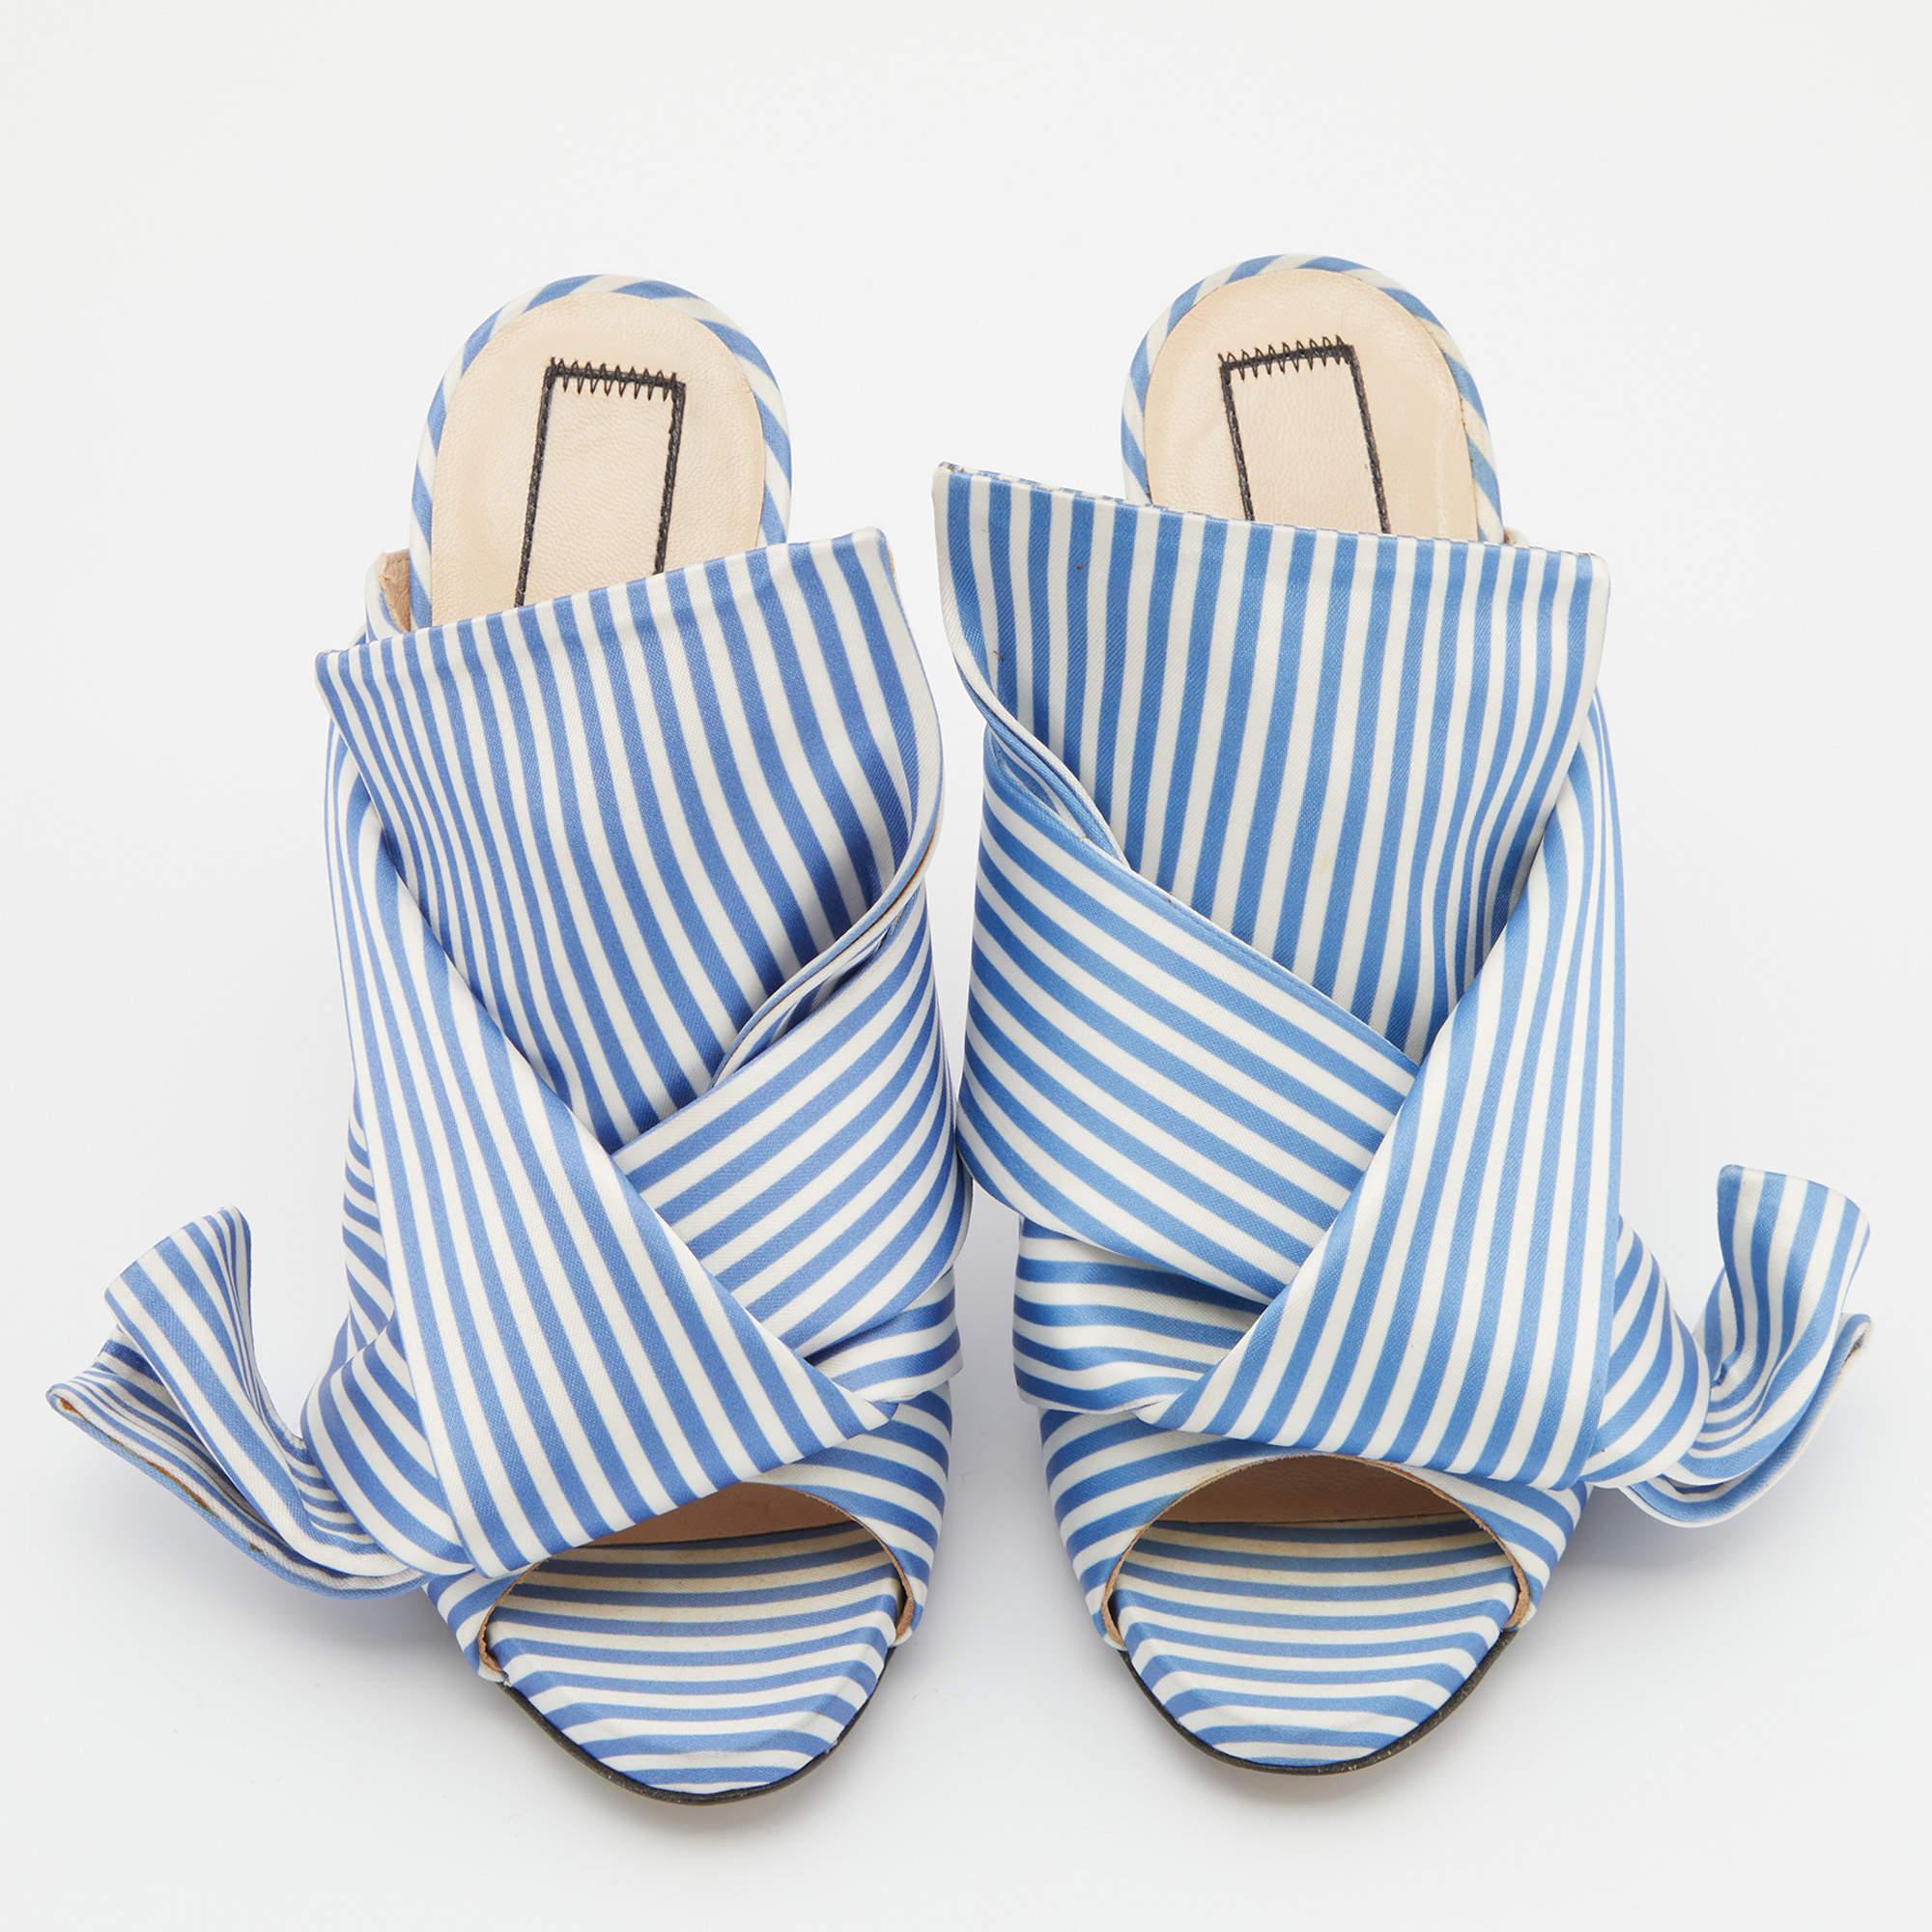 One look at this pair of Nº21 mules and our hearts skip a beat. These beautiful mules have been styled with perfection just so a diva like you can flaunt them. The pair has been designed with big knots on the satin uppers. They'll look amazing with